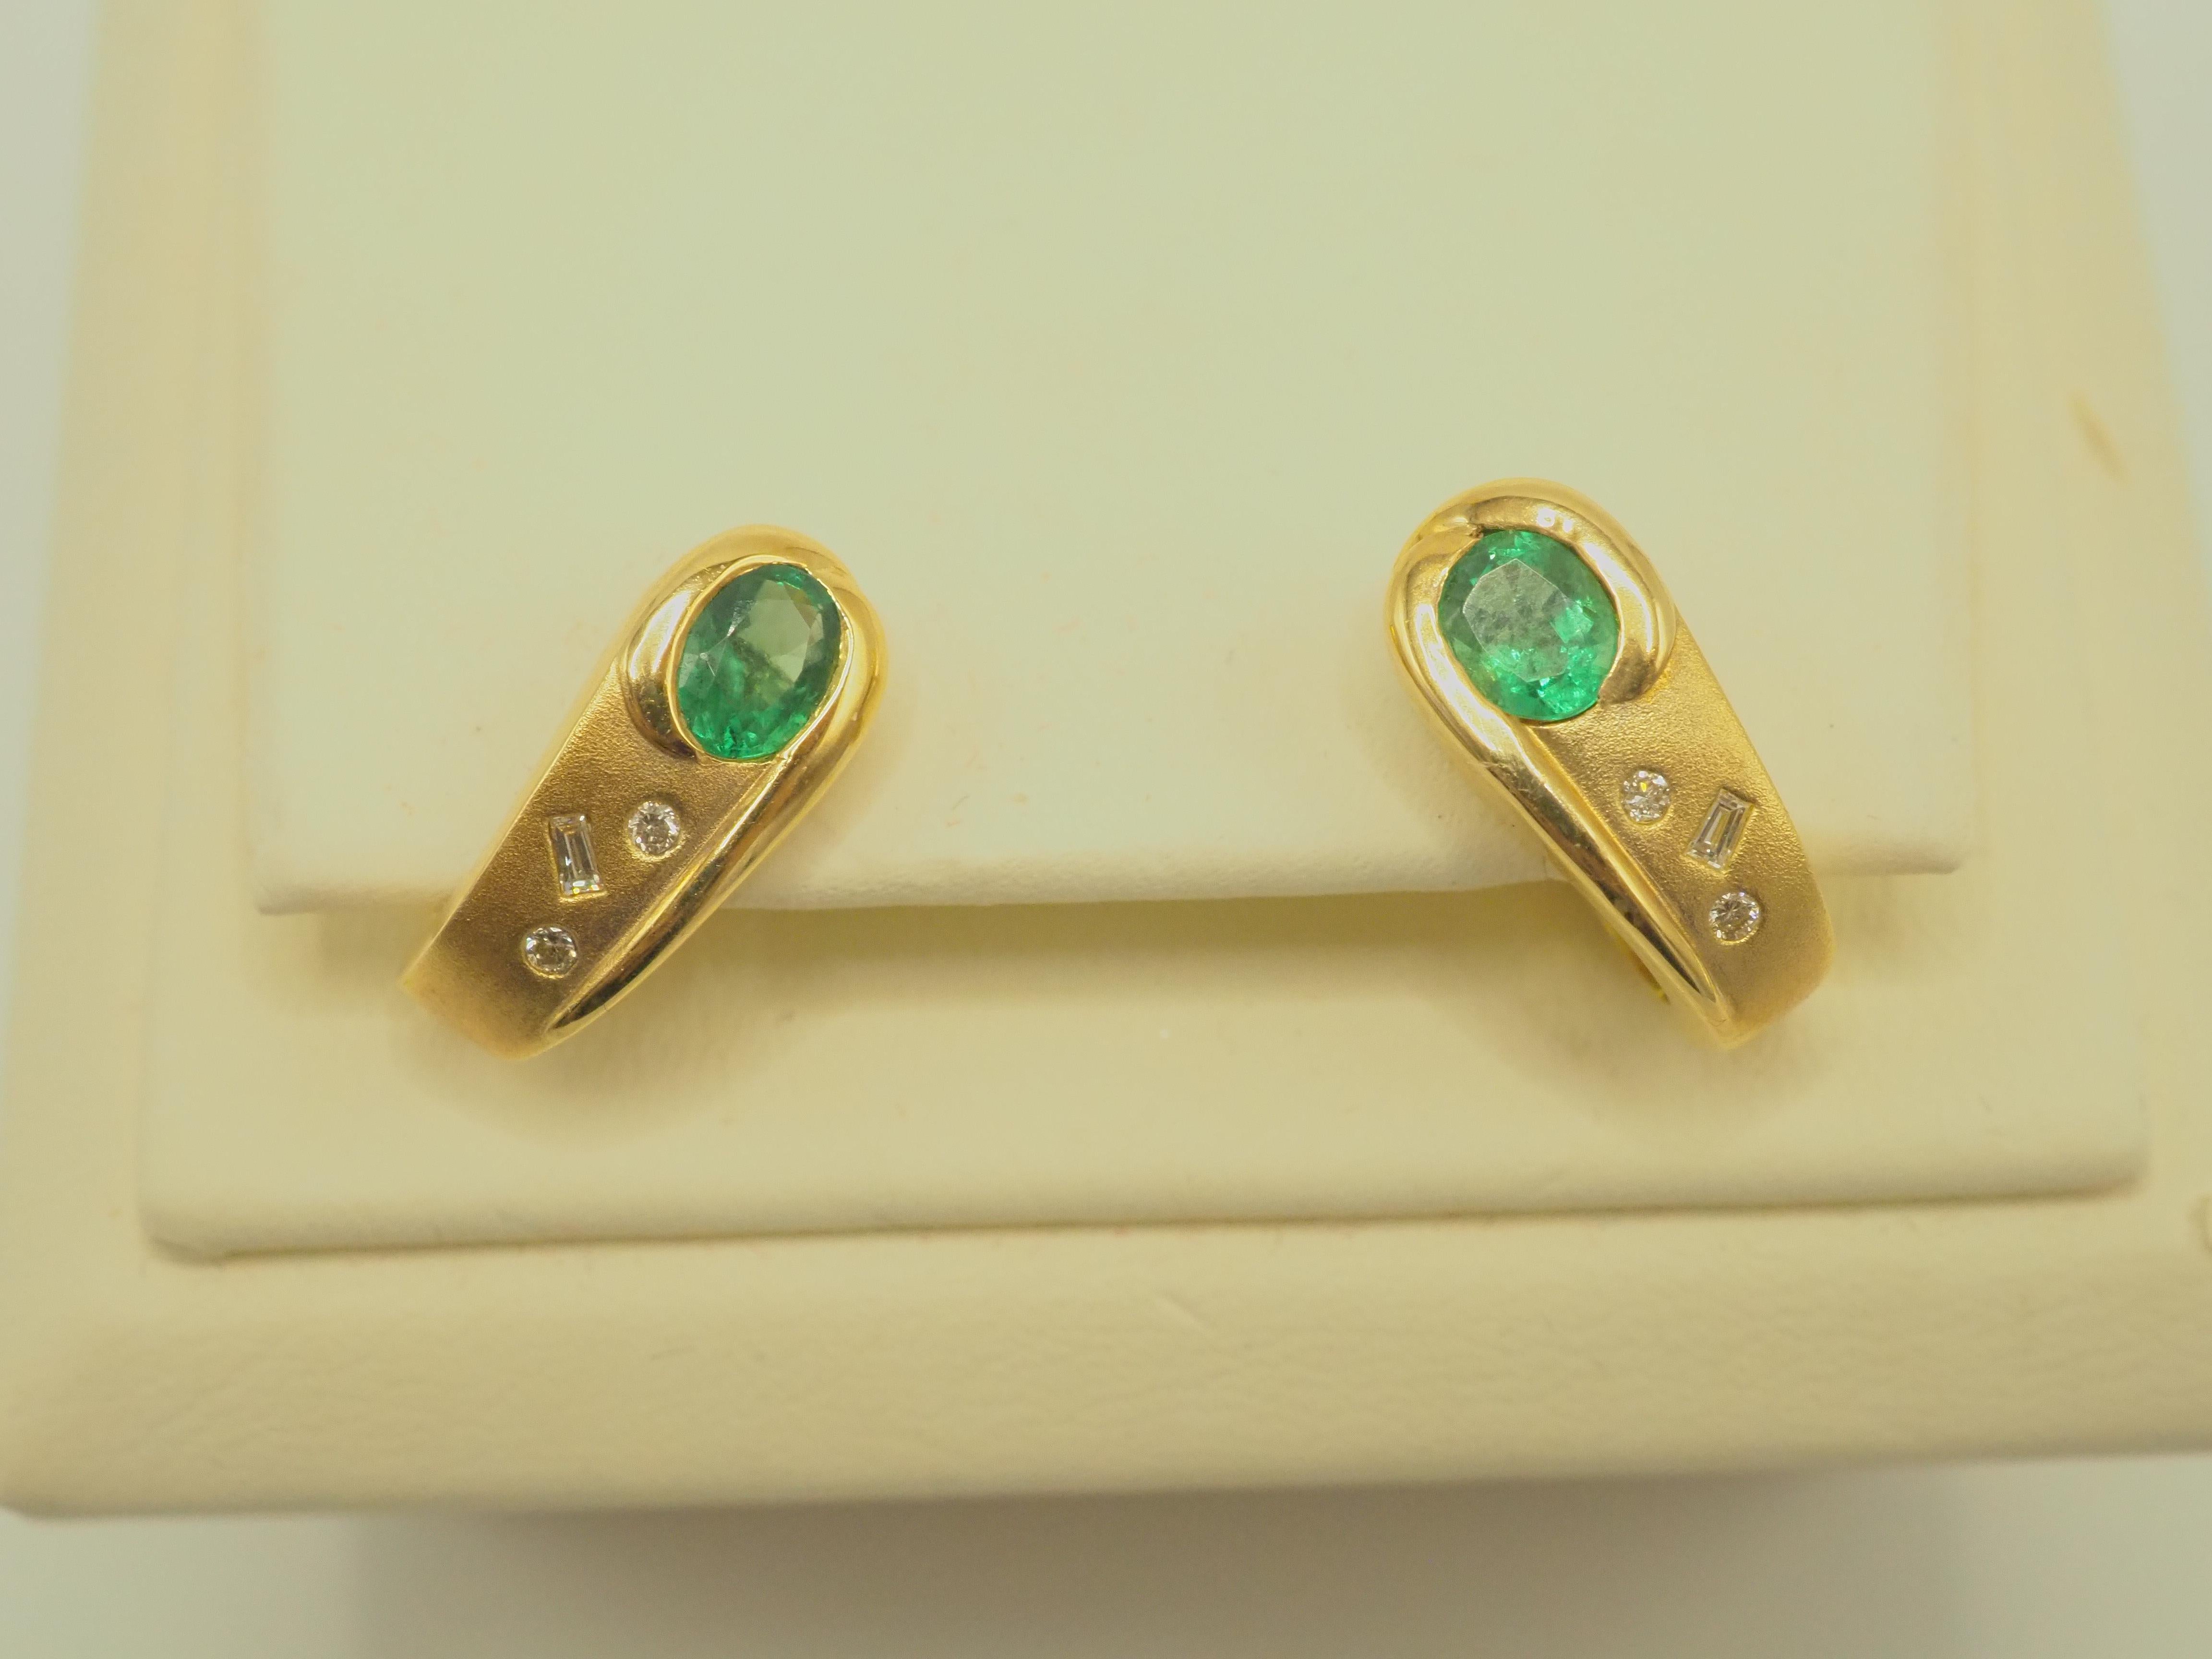 This piece is a fine and gorgeous oval vibrant green emerald and diamond unique earring. The oval emeralds have very nice bright green tone and saturation with good clarity. The baguette and round diamonds are bright with good color and clarity,